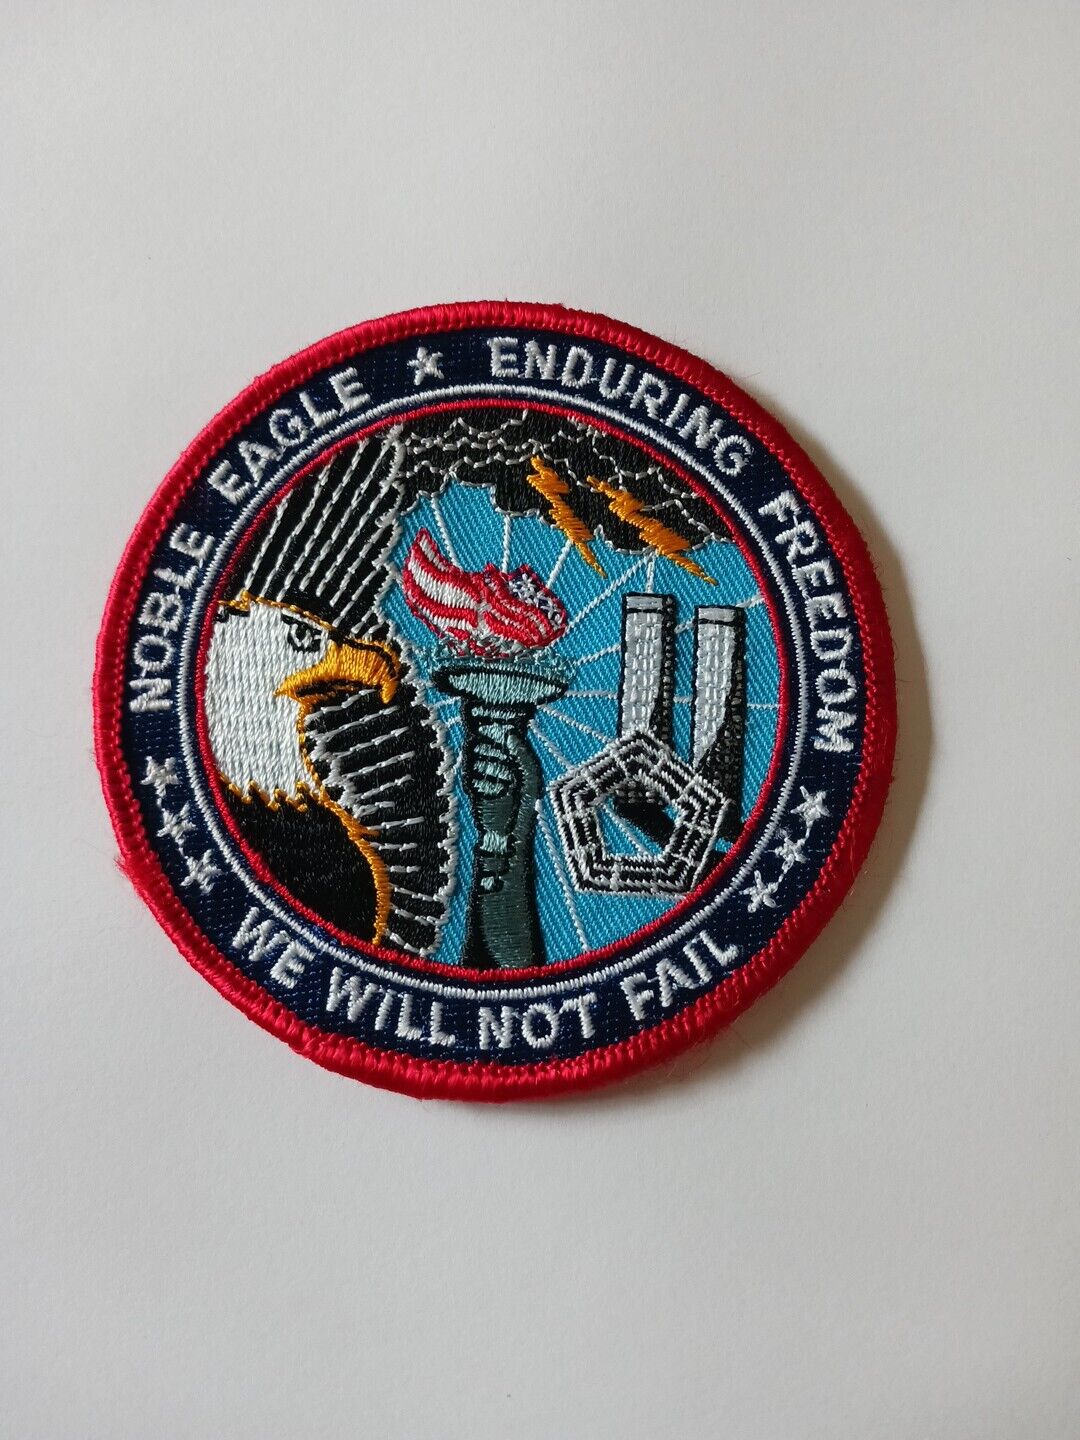 Vintage Noble Eagle Enduring Freedom Patch We Will Not Fail 9-11 